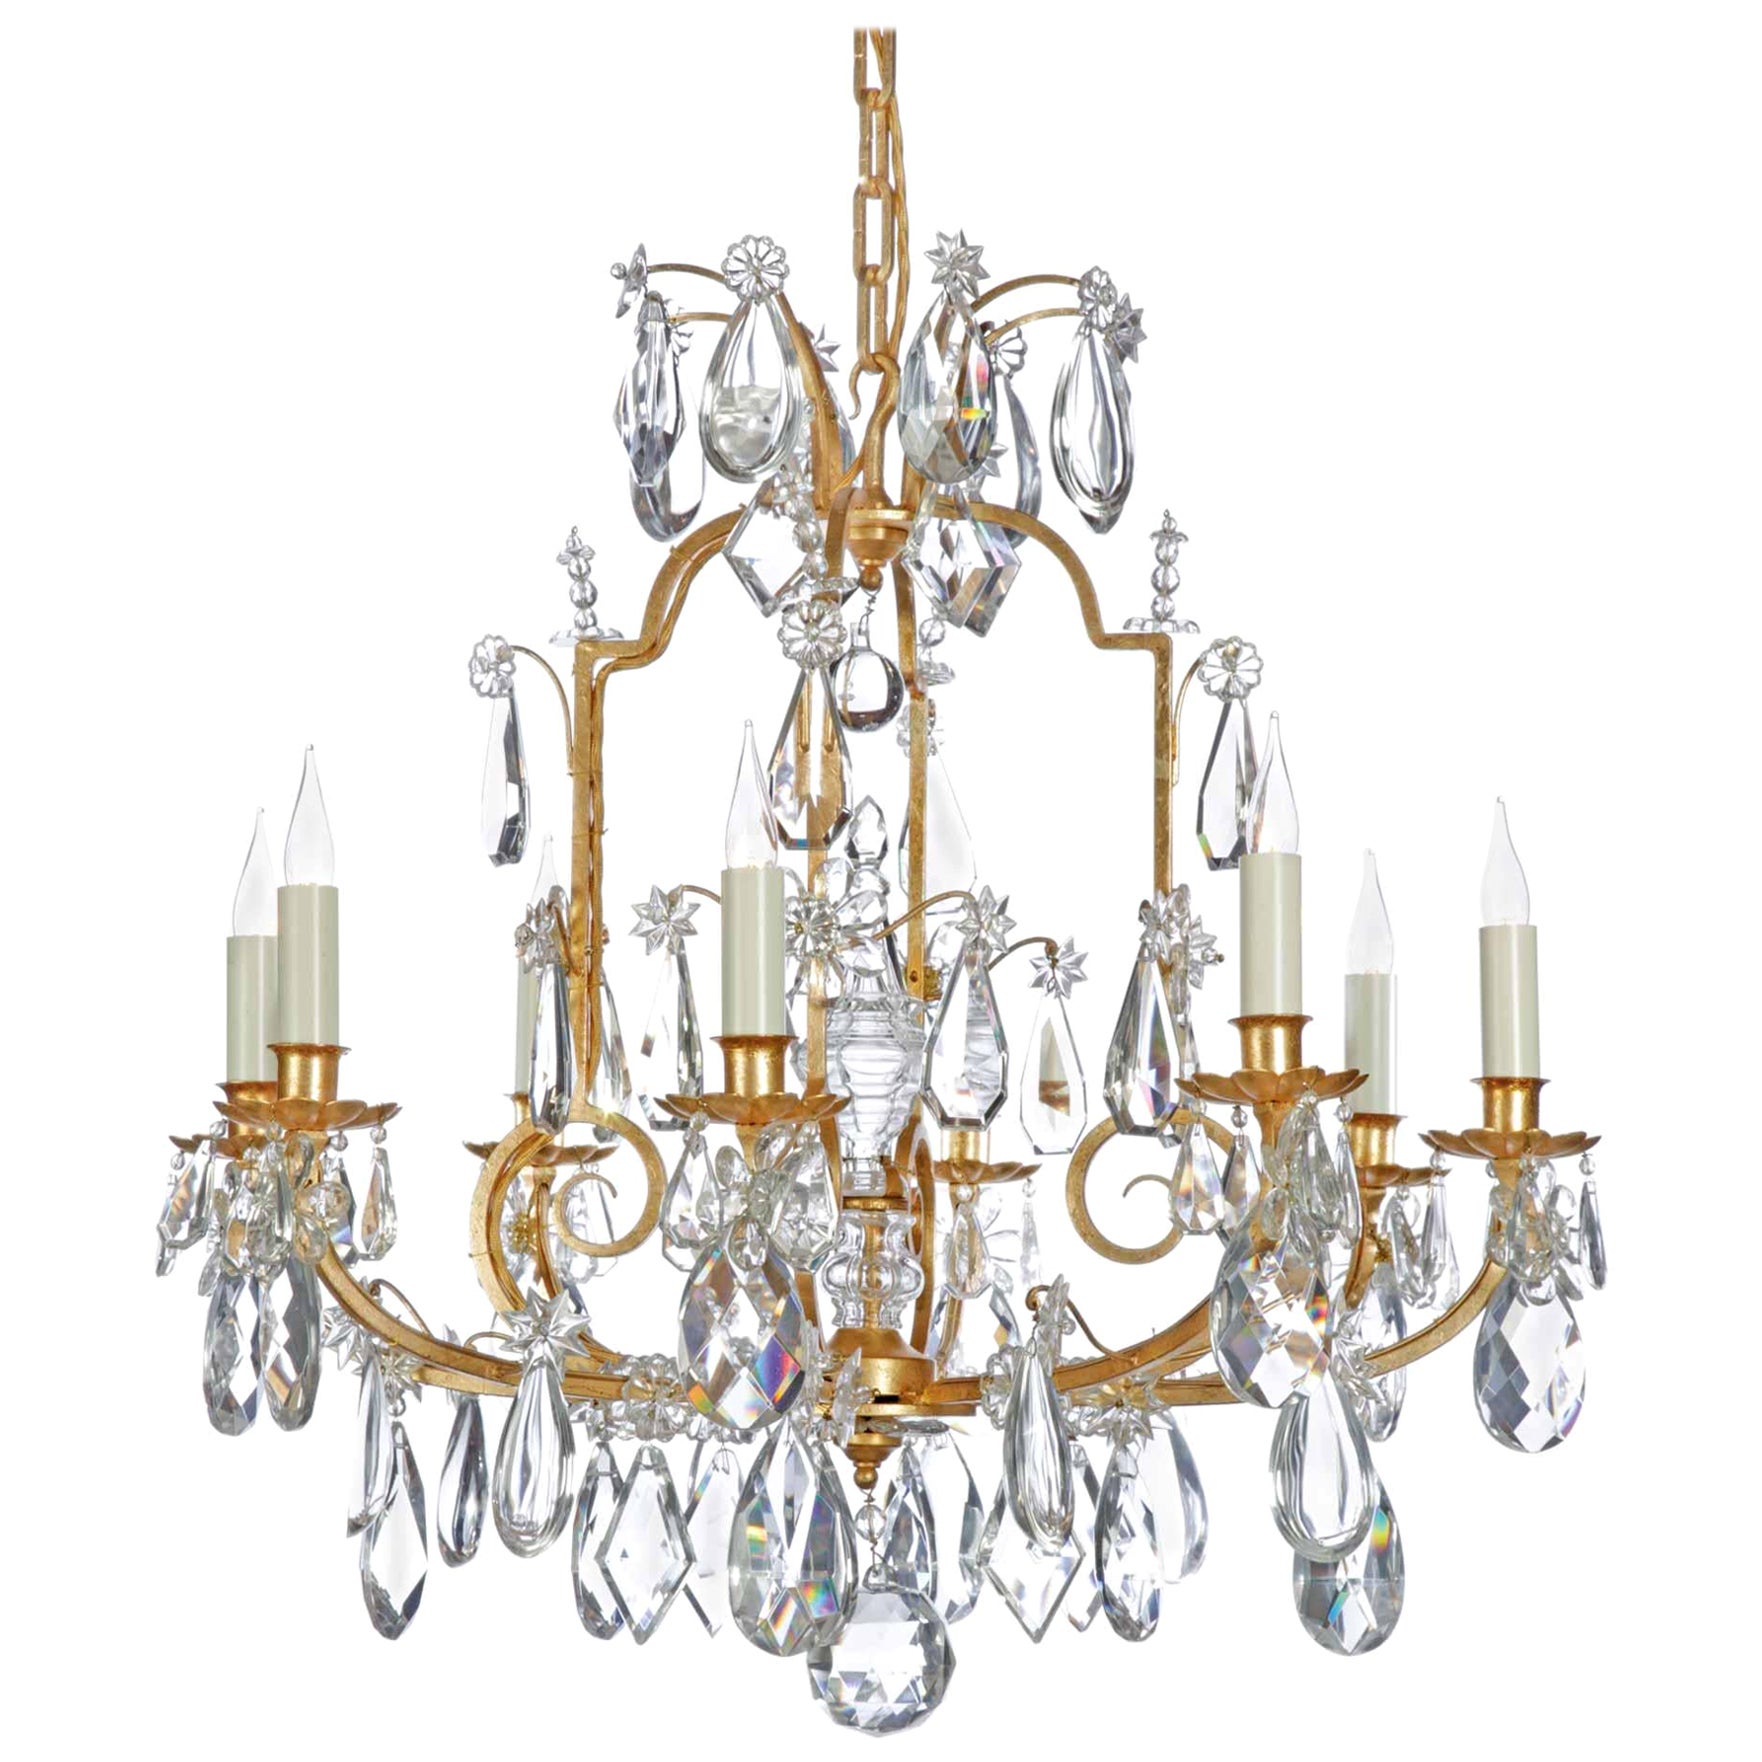 Certified Maison Bagues  Chandelier, 8 Lights Iron & Crystal #17893 For Sale